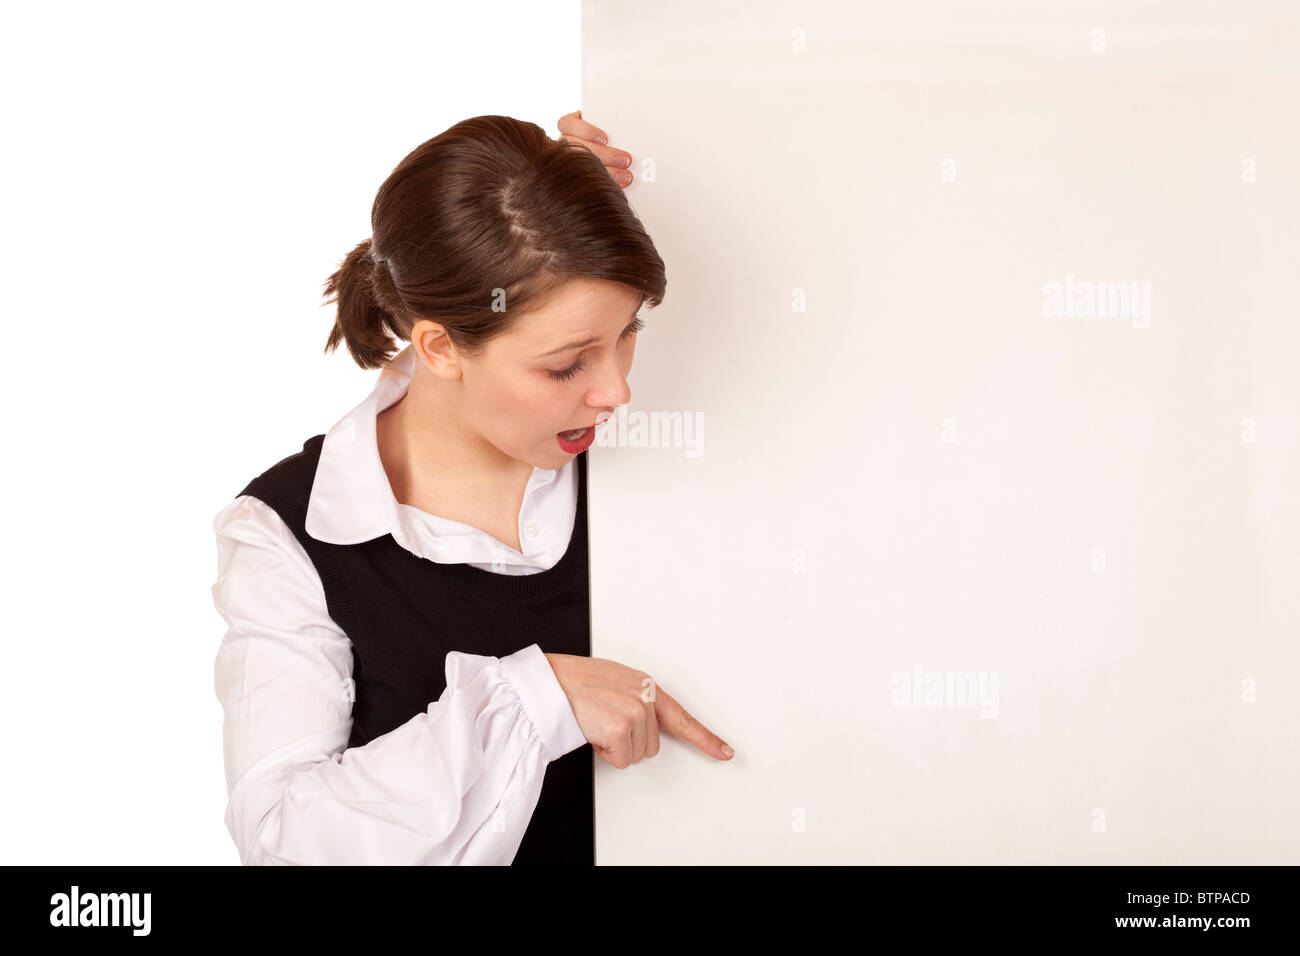 Young surprised woman points with finger on blank board. Isolated on white background. Stock Photo